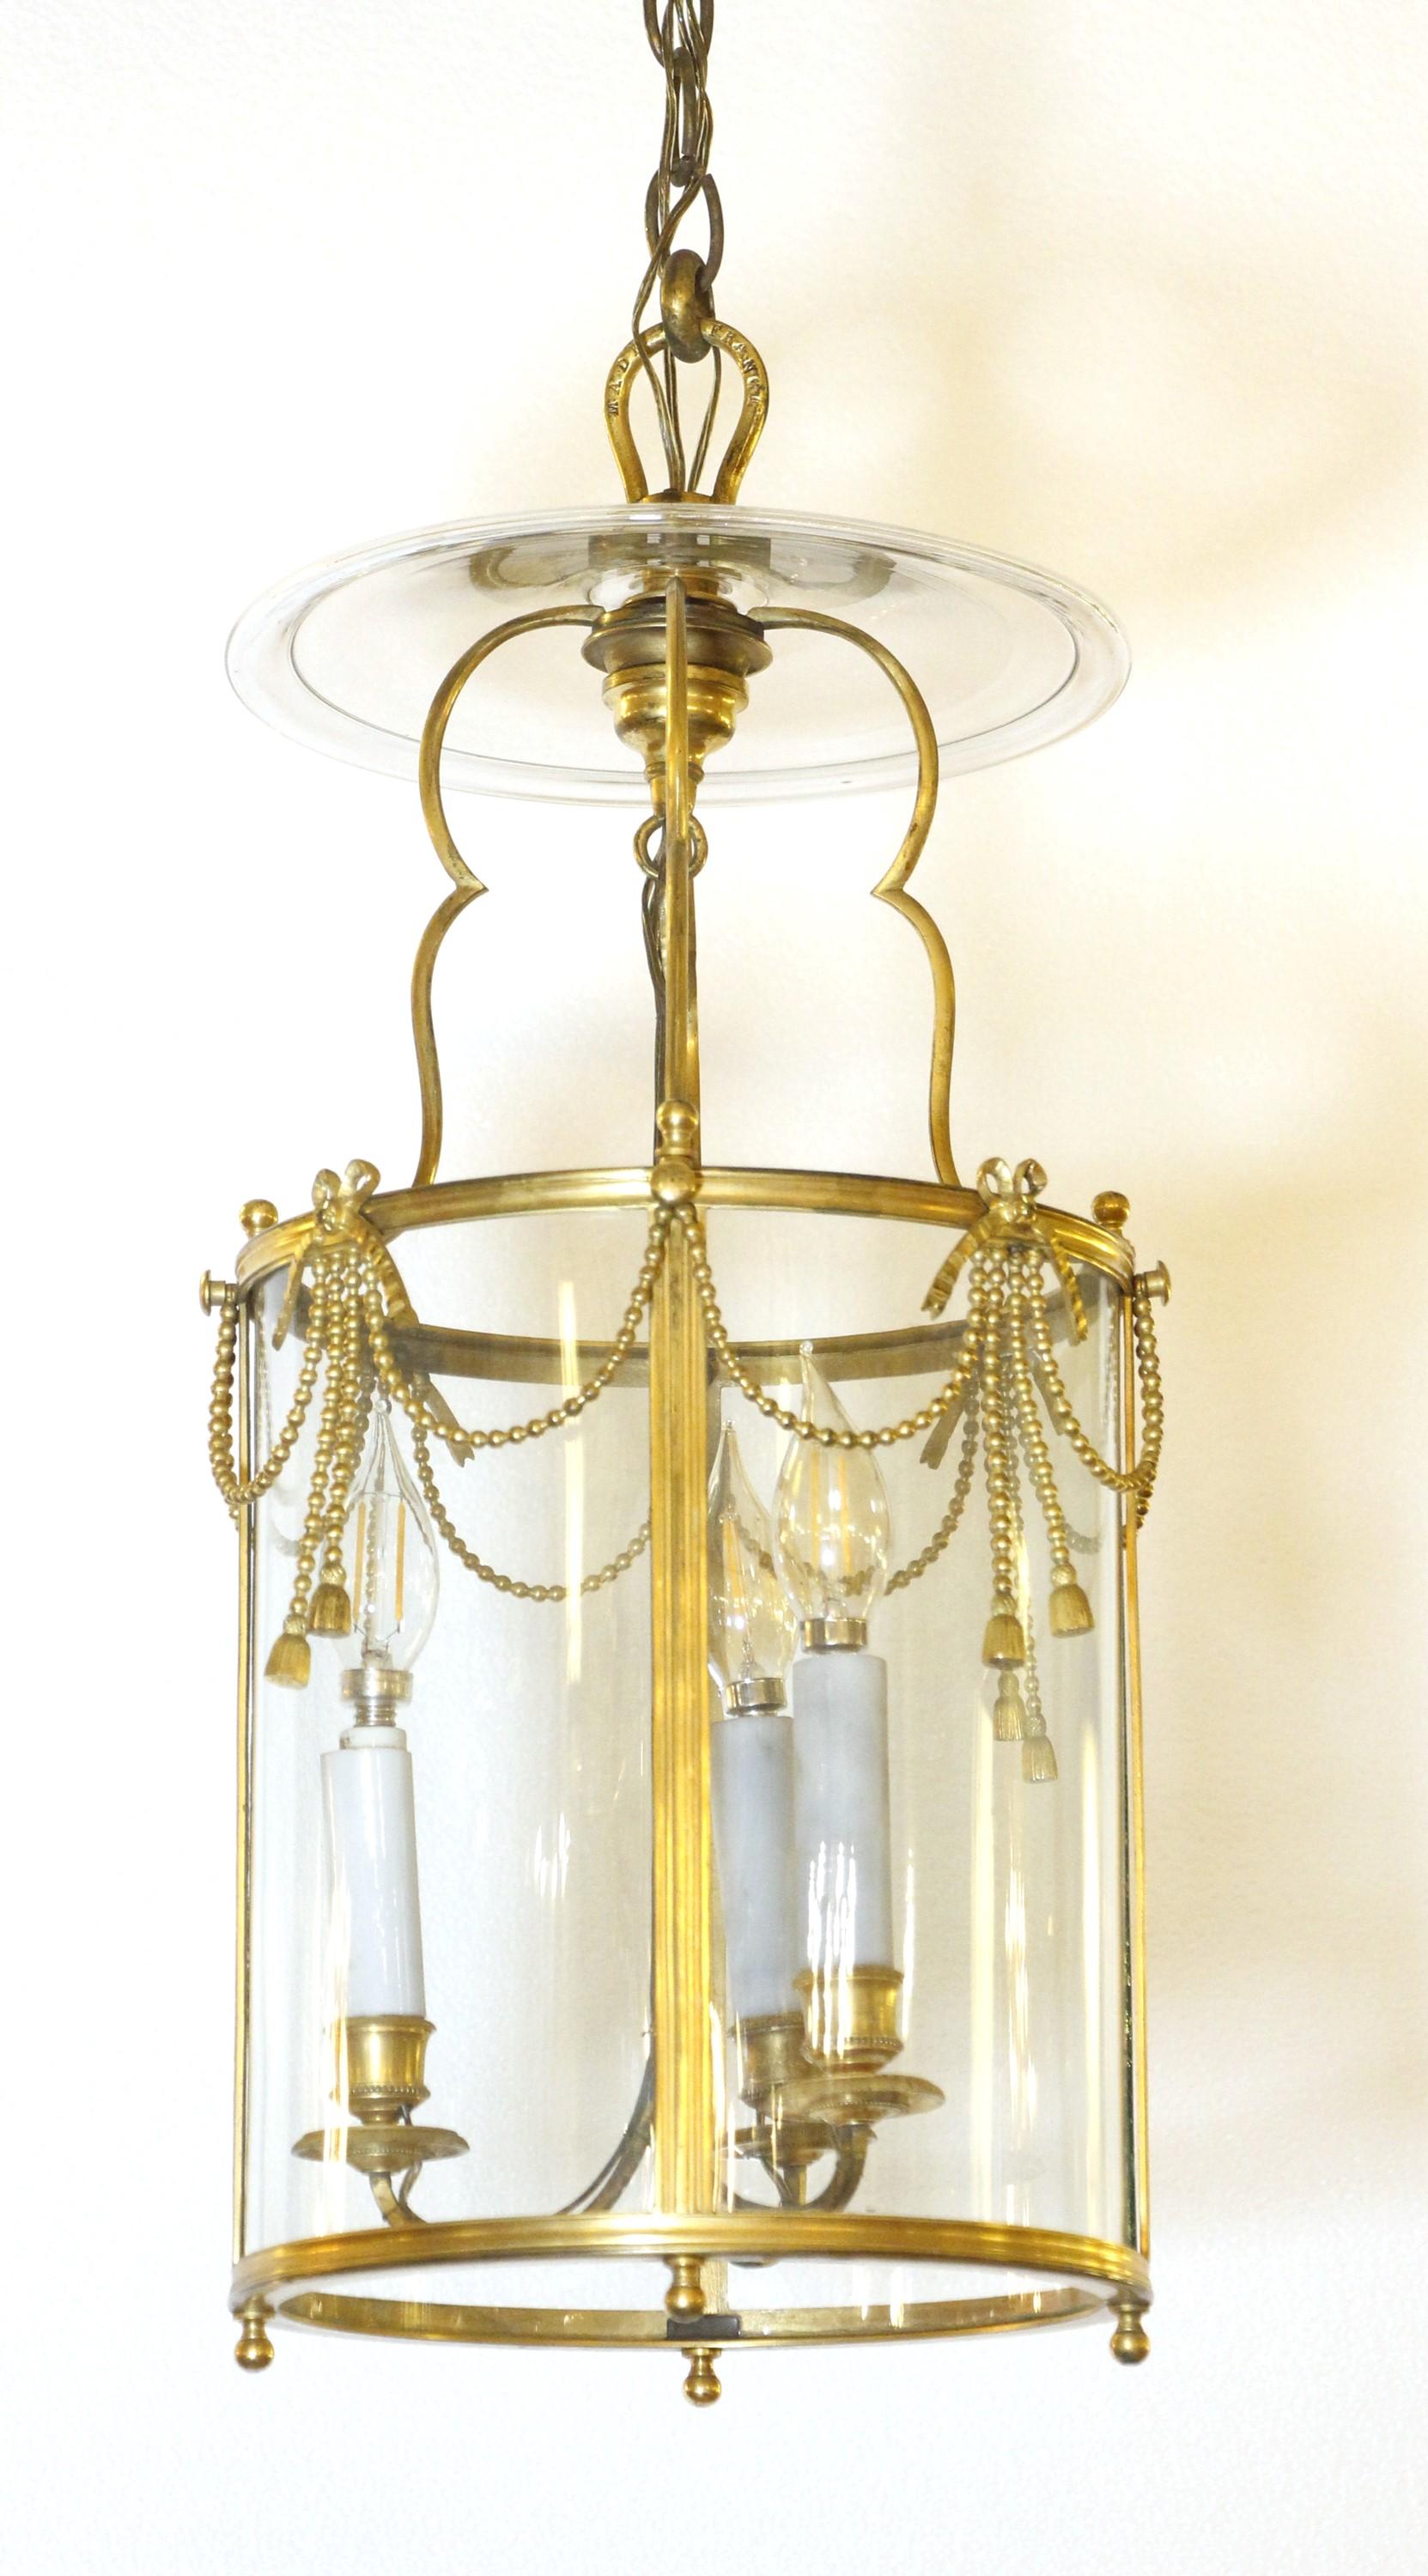 Bronze gold gilded, three light, 20th C., lantern light with canopy. It is adorned with a series of chain swags with molded tassels and ribbons decorating the cylinder glass. The bottom features four small finials. This is wired and ready to ship.